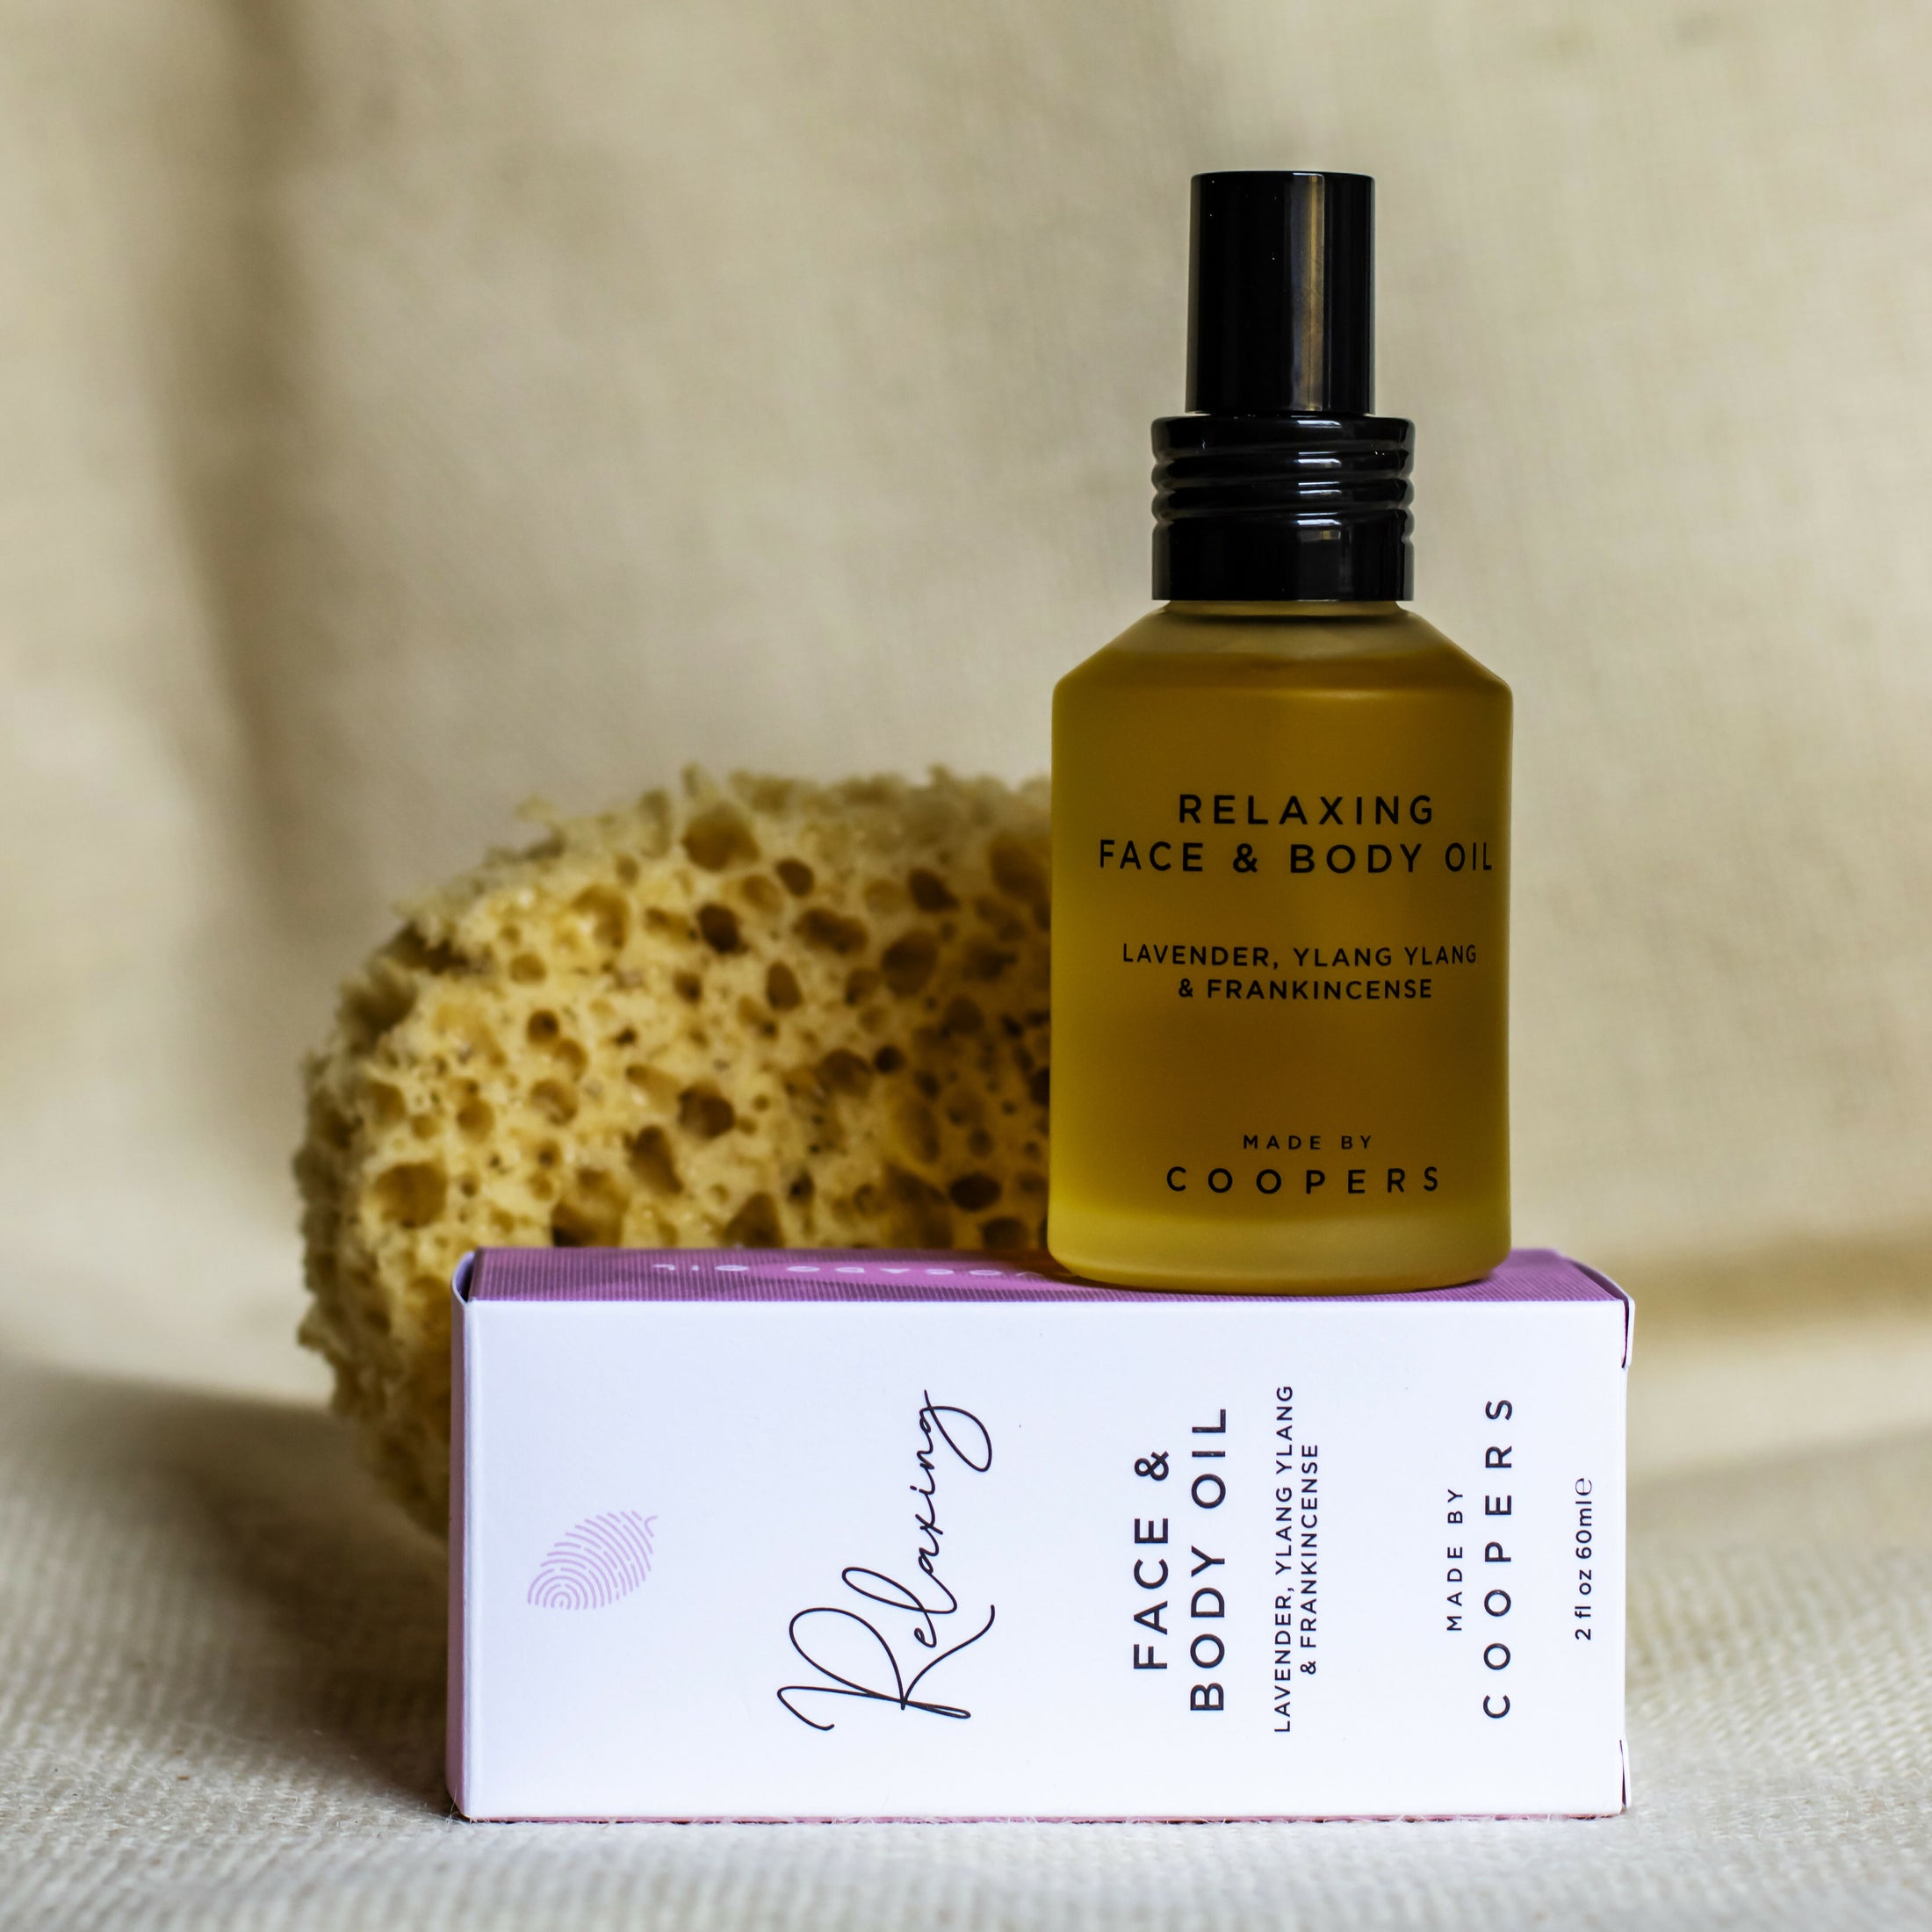 Relaxing Face & Body Oil - Cold Pressed Plant Oils With Lavender, Frankincense and Ylang Ylang Essential Oils. 60ml Glass Bottle.